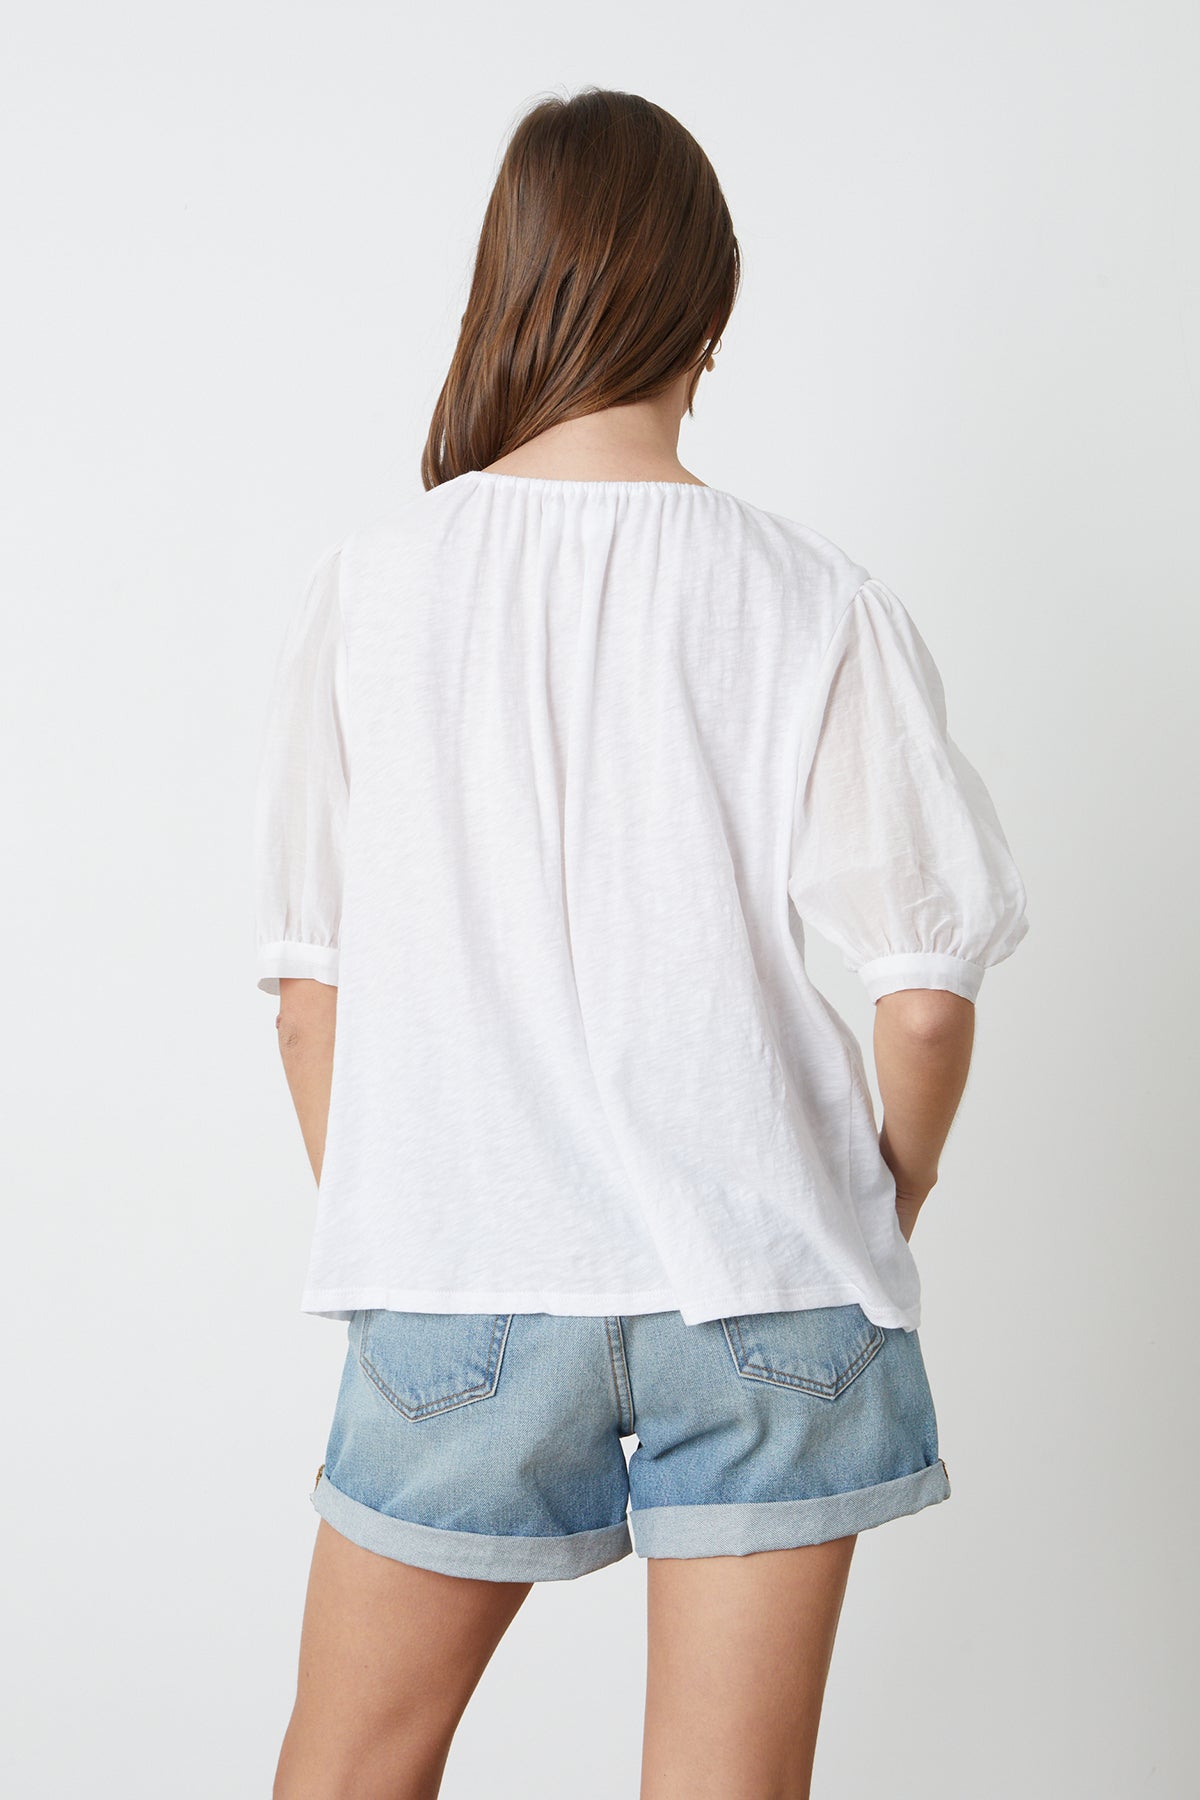 Mallory Top in white with puff sleeves paired with blue denim shorts back-26255715434689